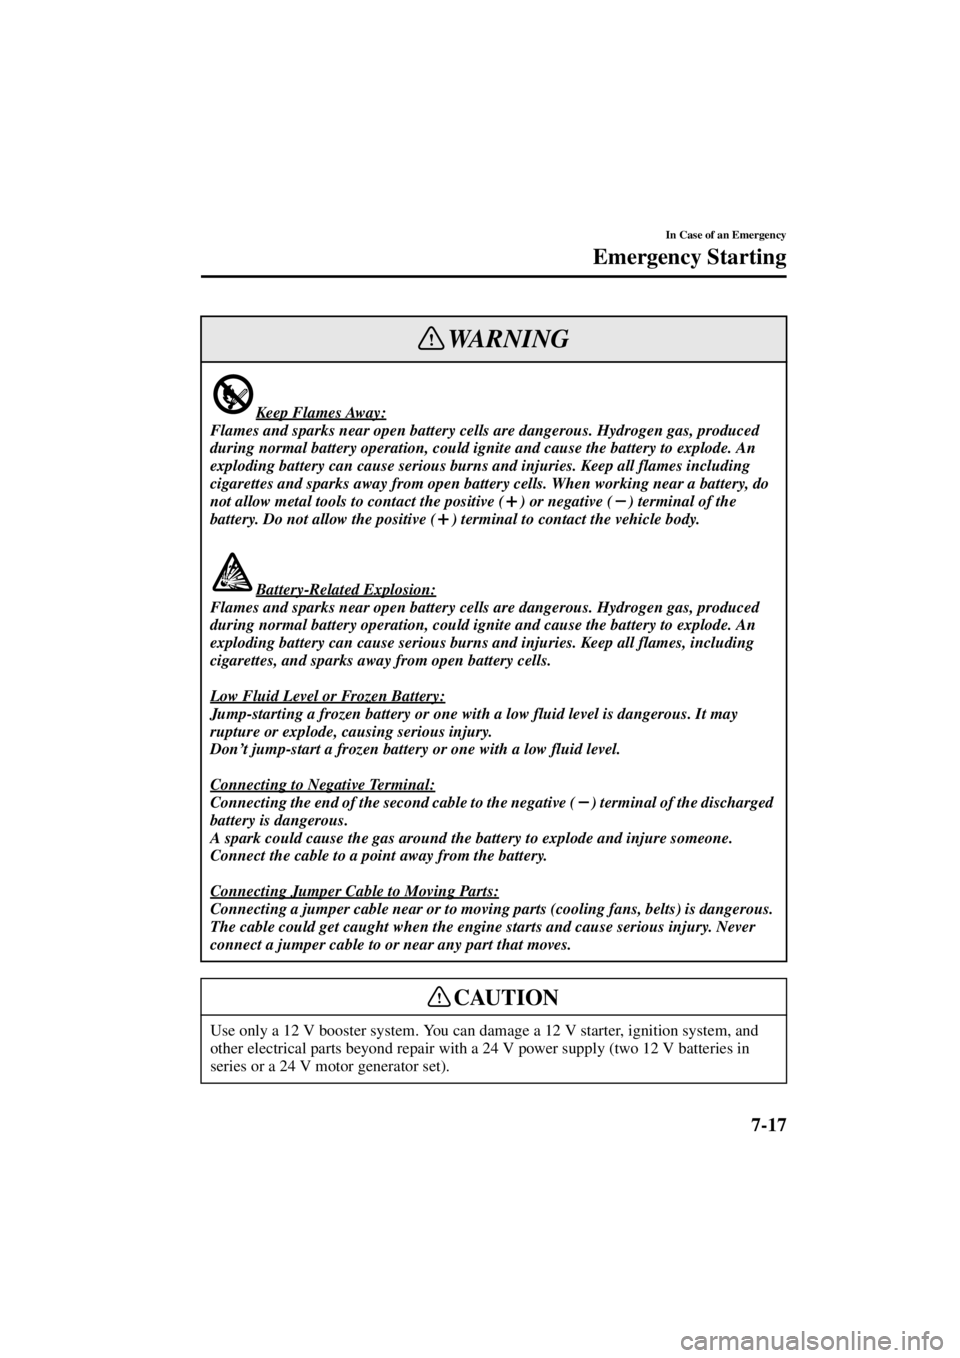 MAZDA MODEL 3 5-DOOR 2004  Owners Manual 7-17
In Case of an Emergency
Emergency Starting
Form No. 8S18-EA-03I
Keep Flames Away:
Flames and sparks near open battery cells are dangerous. Hydrogen gas, produced 
during normal battery operation,